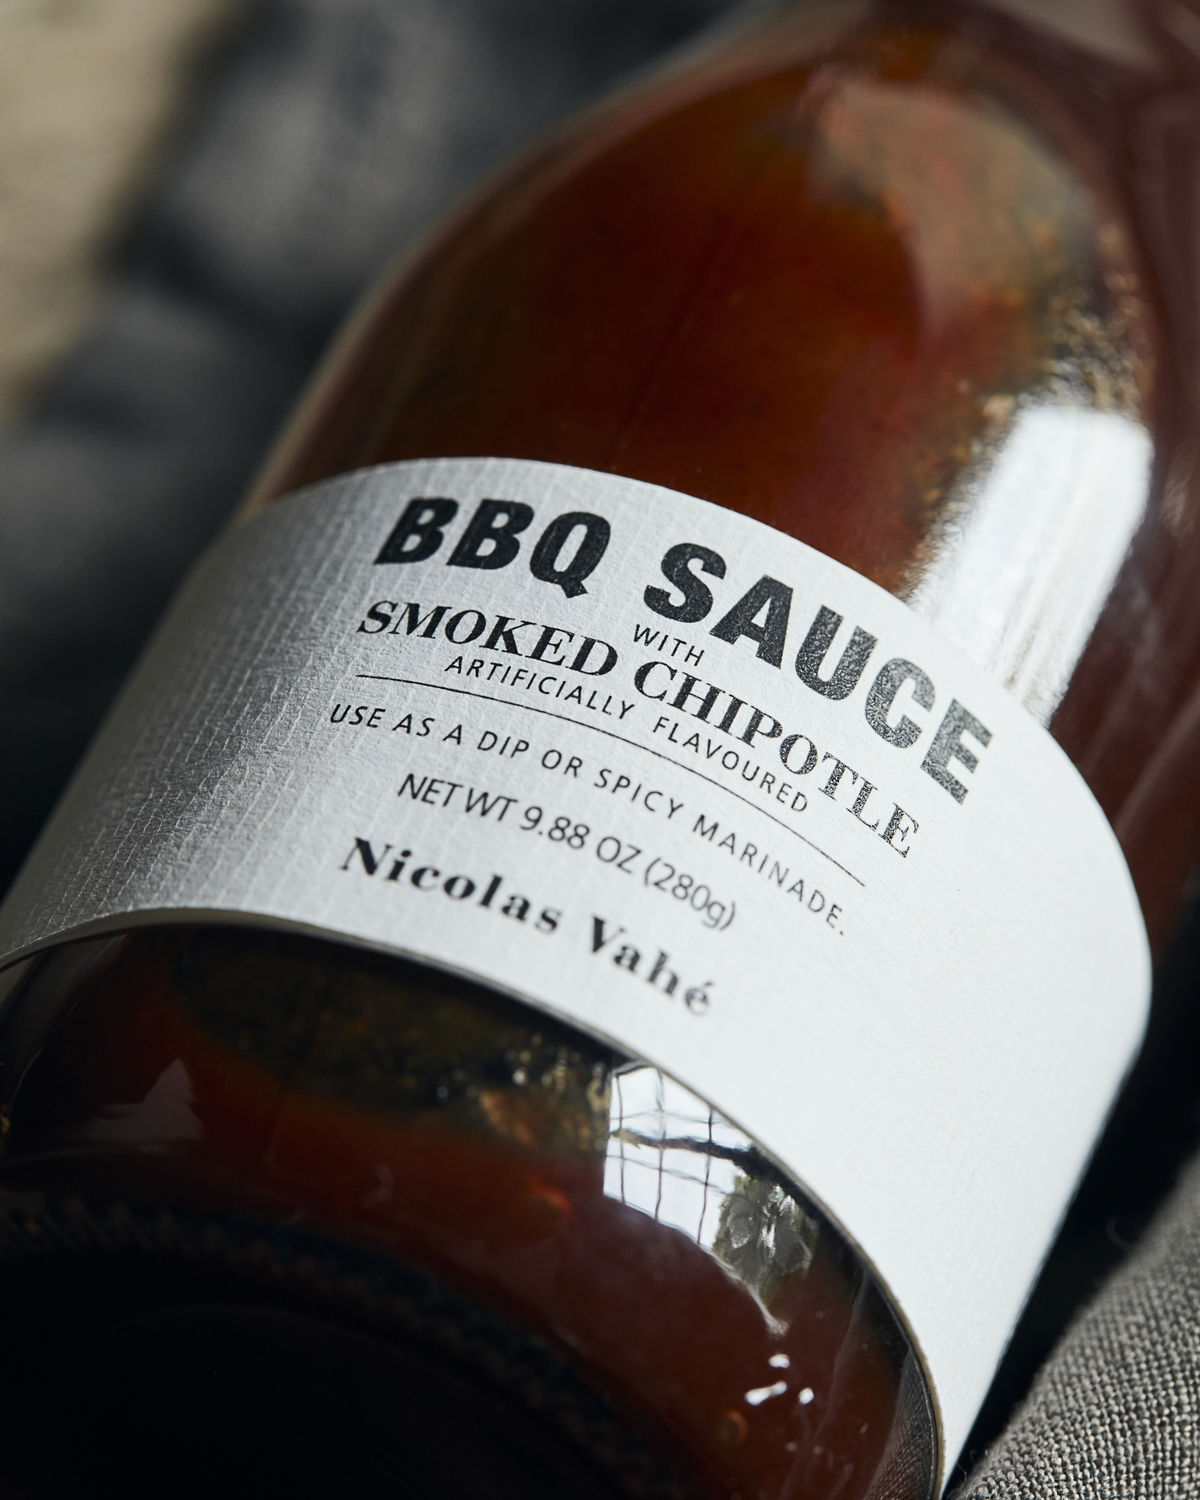 Barbecue Sauce, Smoked Chipotle, 25 cl.